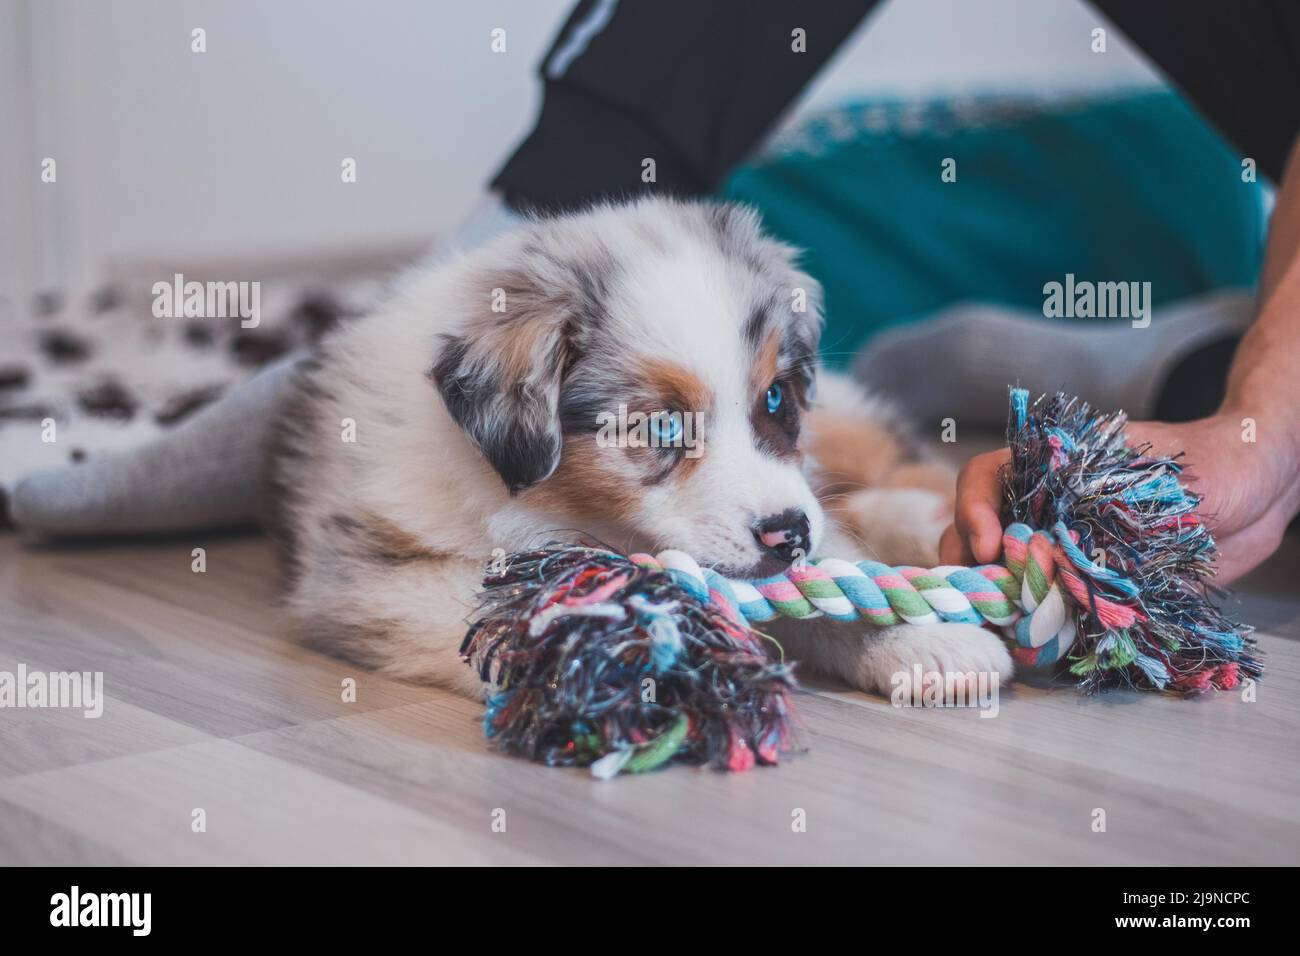 Tired Australian Shepherd puppy rests on her blanket and enjoys dreamland. The brown and black and white puppy looks bored and waits for some action. Stock Photo